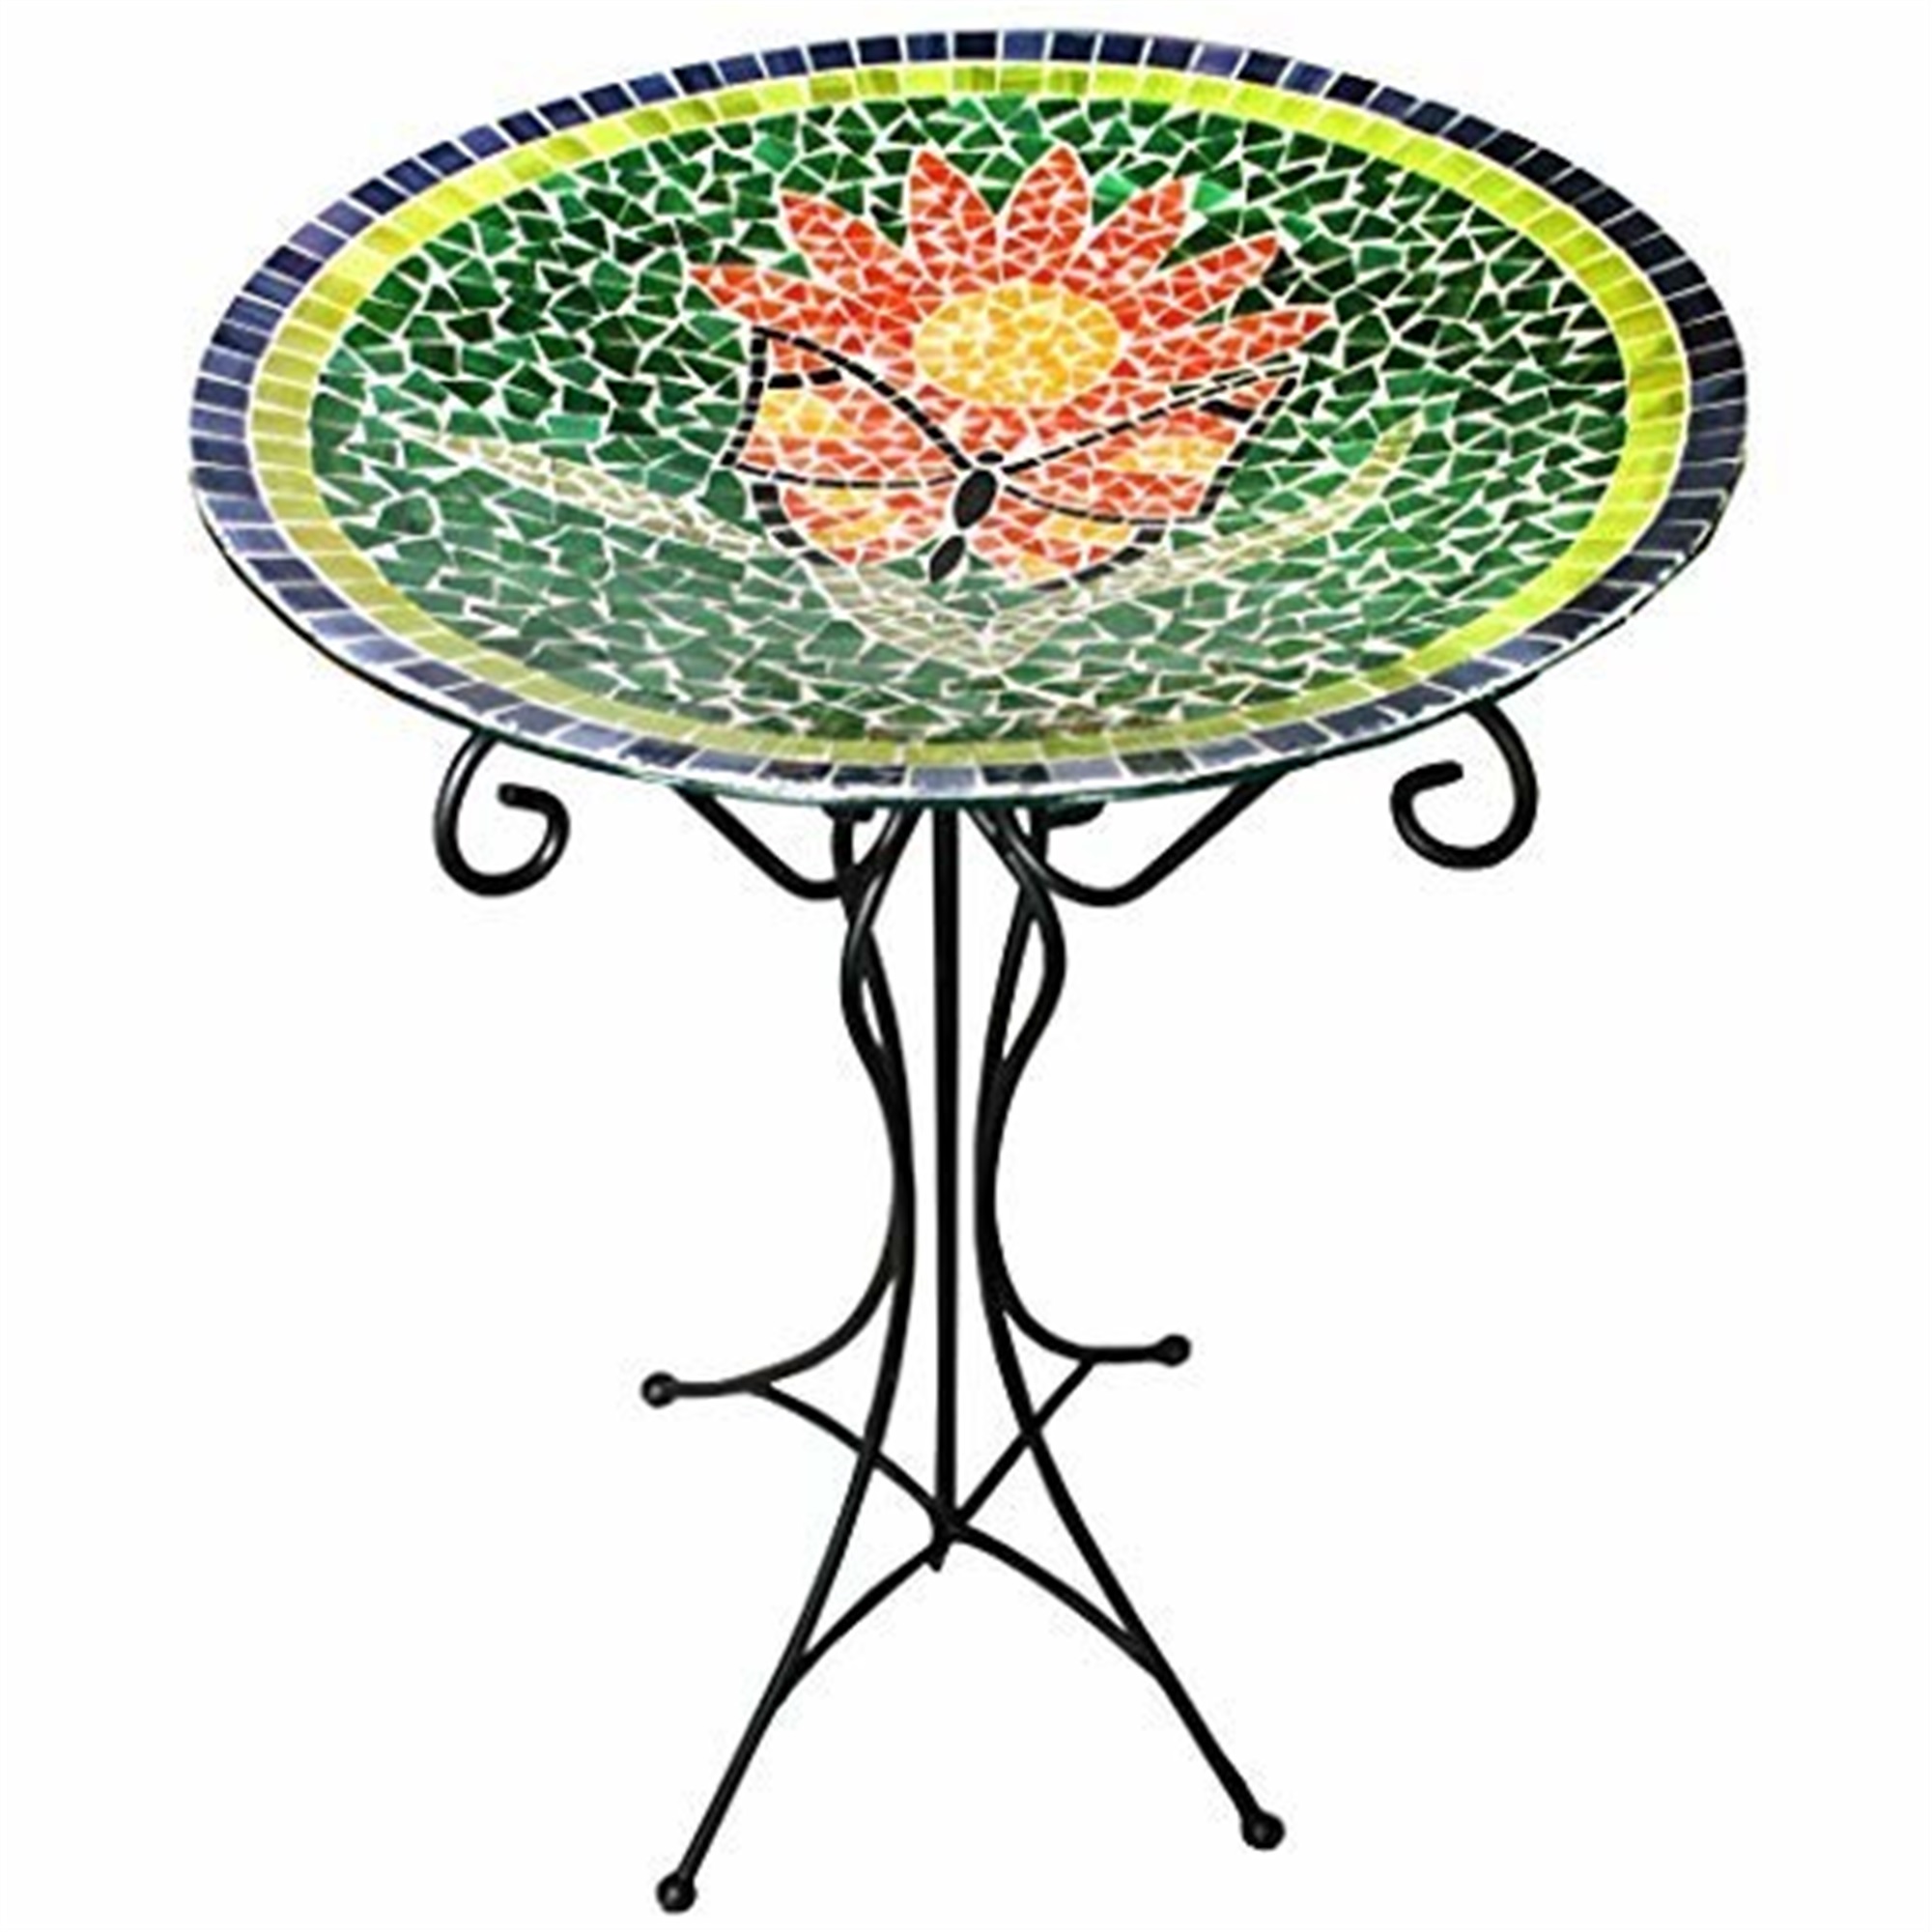 Gardener's Select Butterfly Mosaic Glass Bird Bath and Stand - image 1 of 2